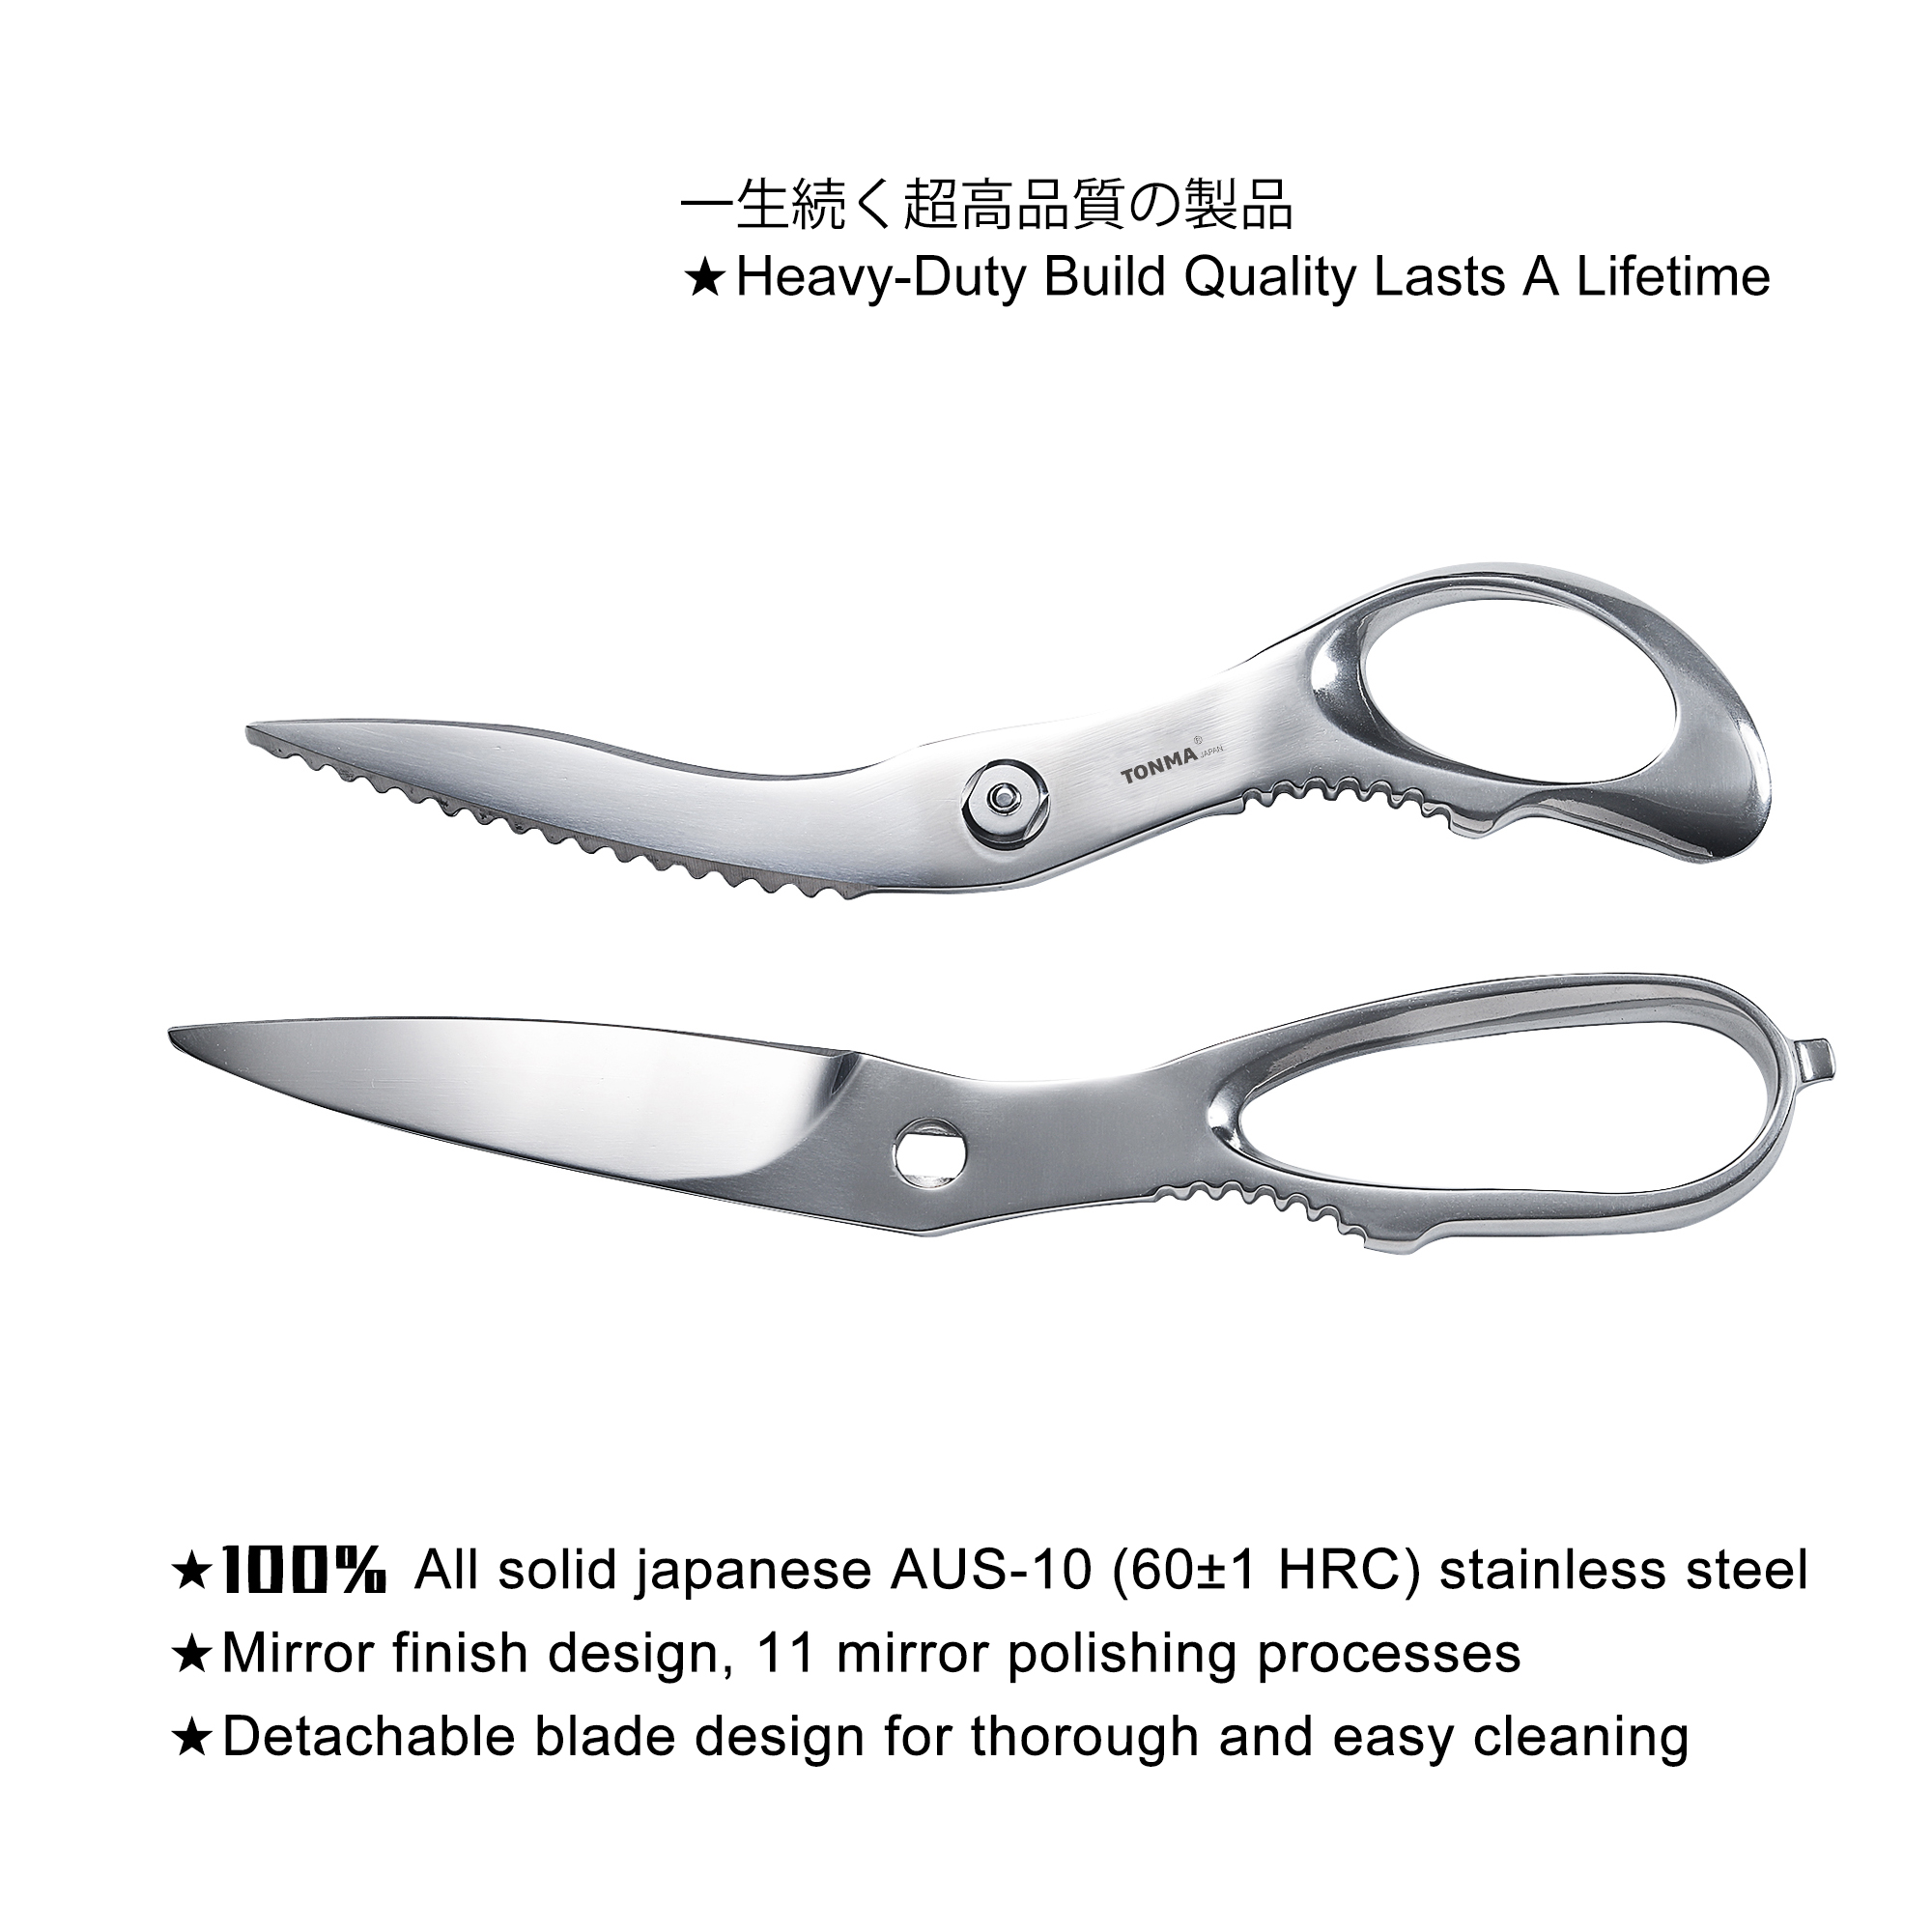 Multipurpose Stainless Steel Kitchen Scissors, Poultry Shears, Bone Cutter,  Suitable For Cutting Meat And Bones During Cooking, Barbecue And Home Use